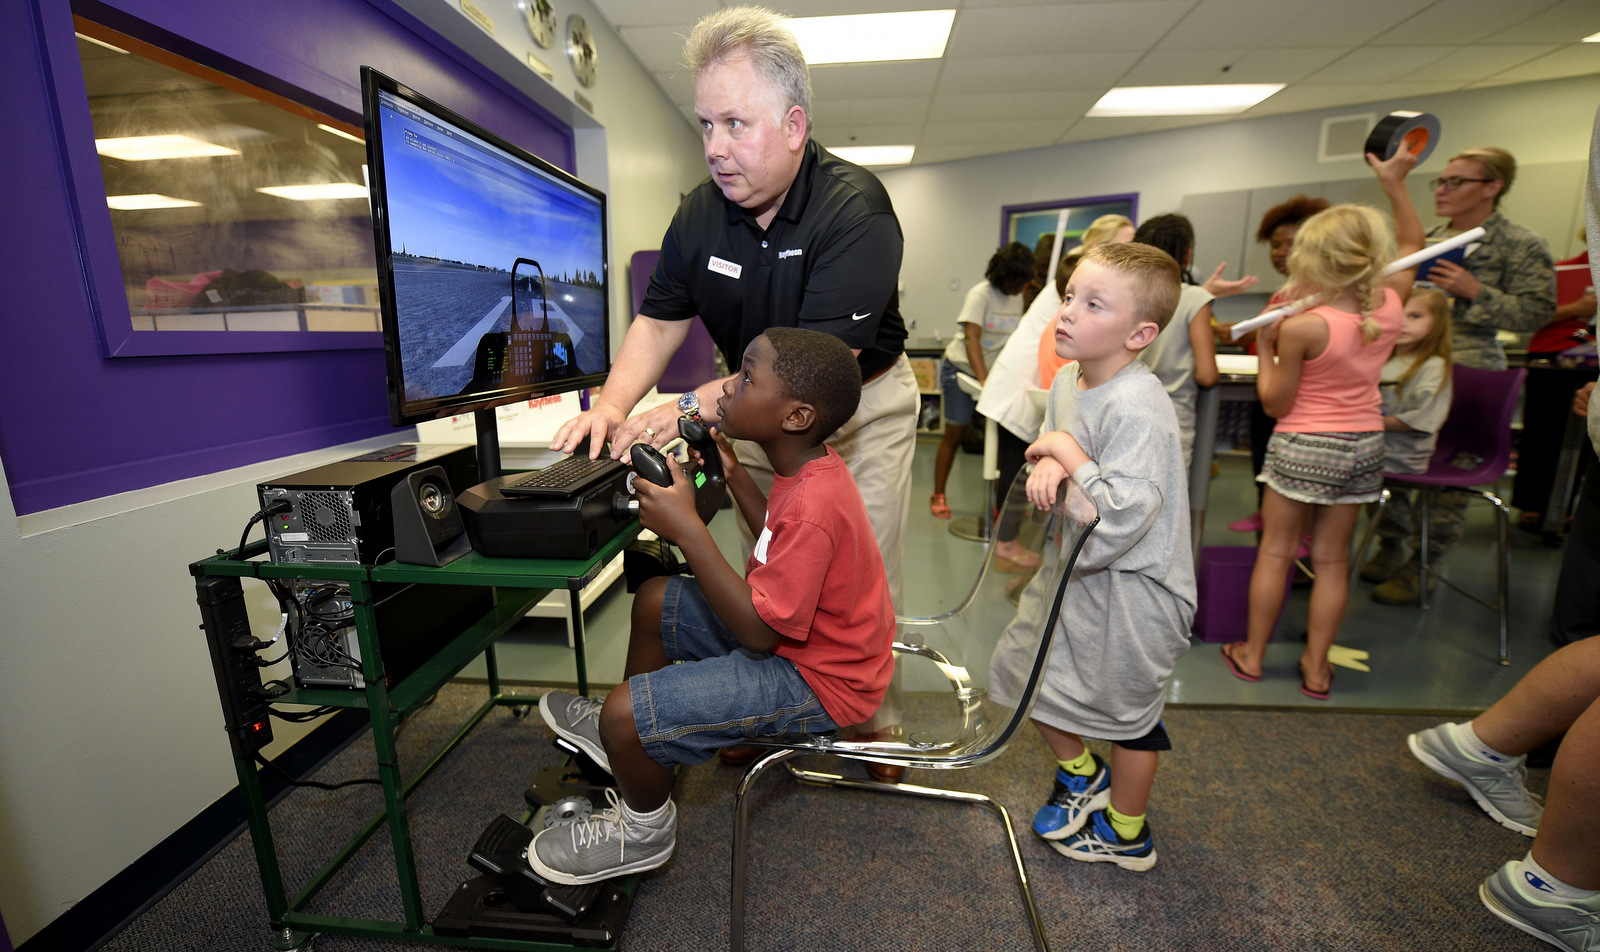 Attendees take part in activities at the Raytheon STEM Centers of Innovation Opening Event,, June 24, 2016, at Joint Base Andrews Youth Center, Md. Boys & Girls Clubs of America in partnership with Raytheon is creating STEM Centers of Innovation at Clubs across the country. (Nick Wass/AP )